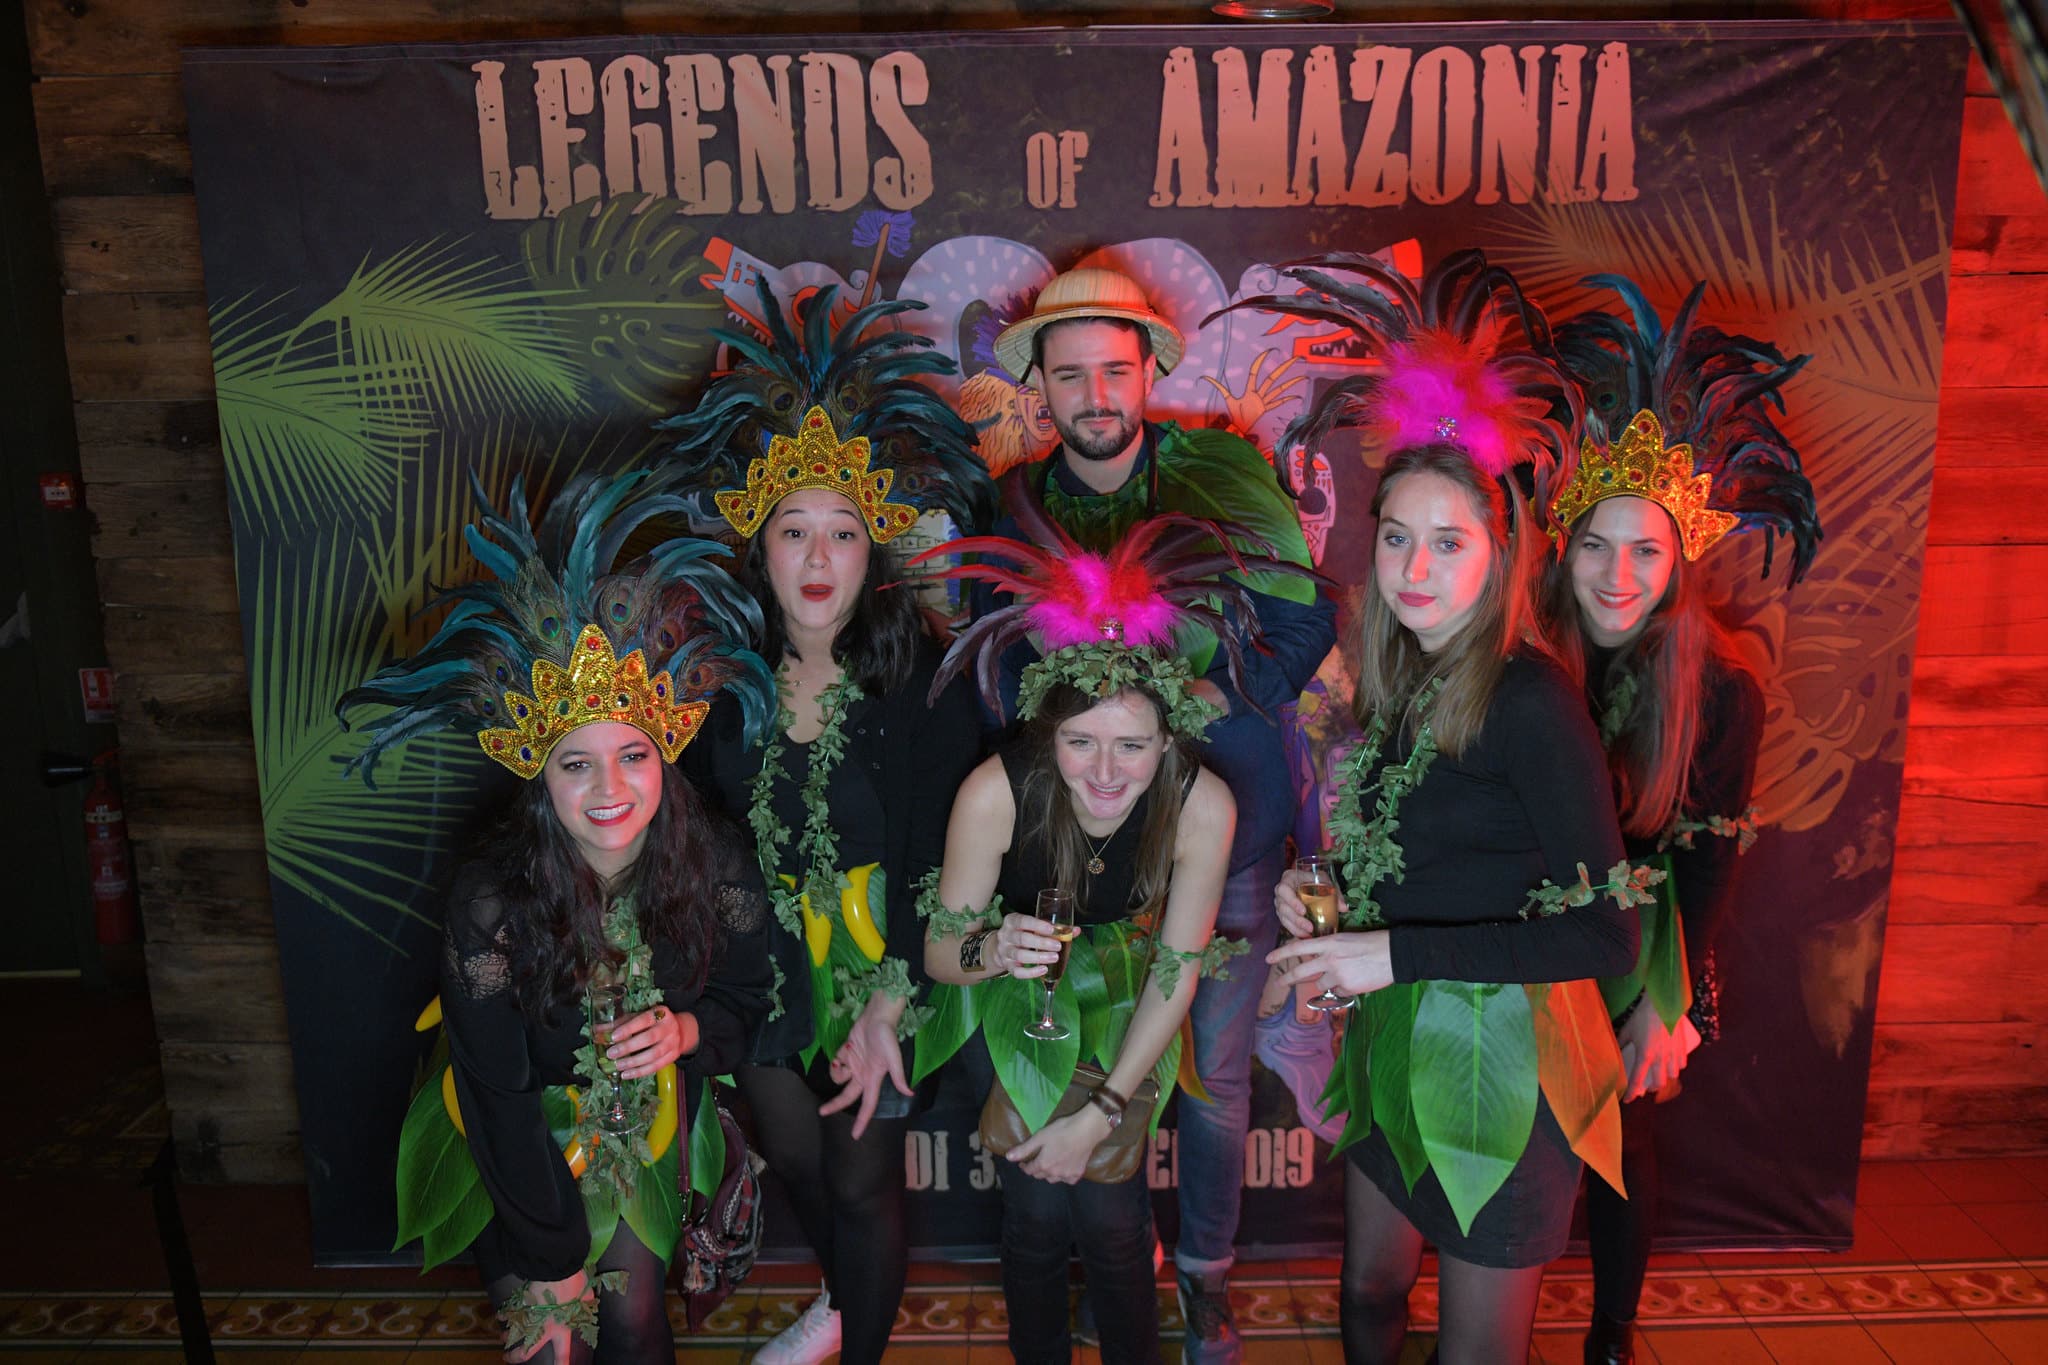 photocall personnalise chapeau soiree corporate theme jungle vegetation scenographie sur mesure amazonia winter party amazon france agence wato we are the oracle evenementiel events